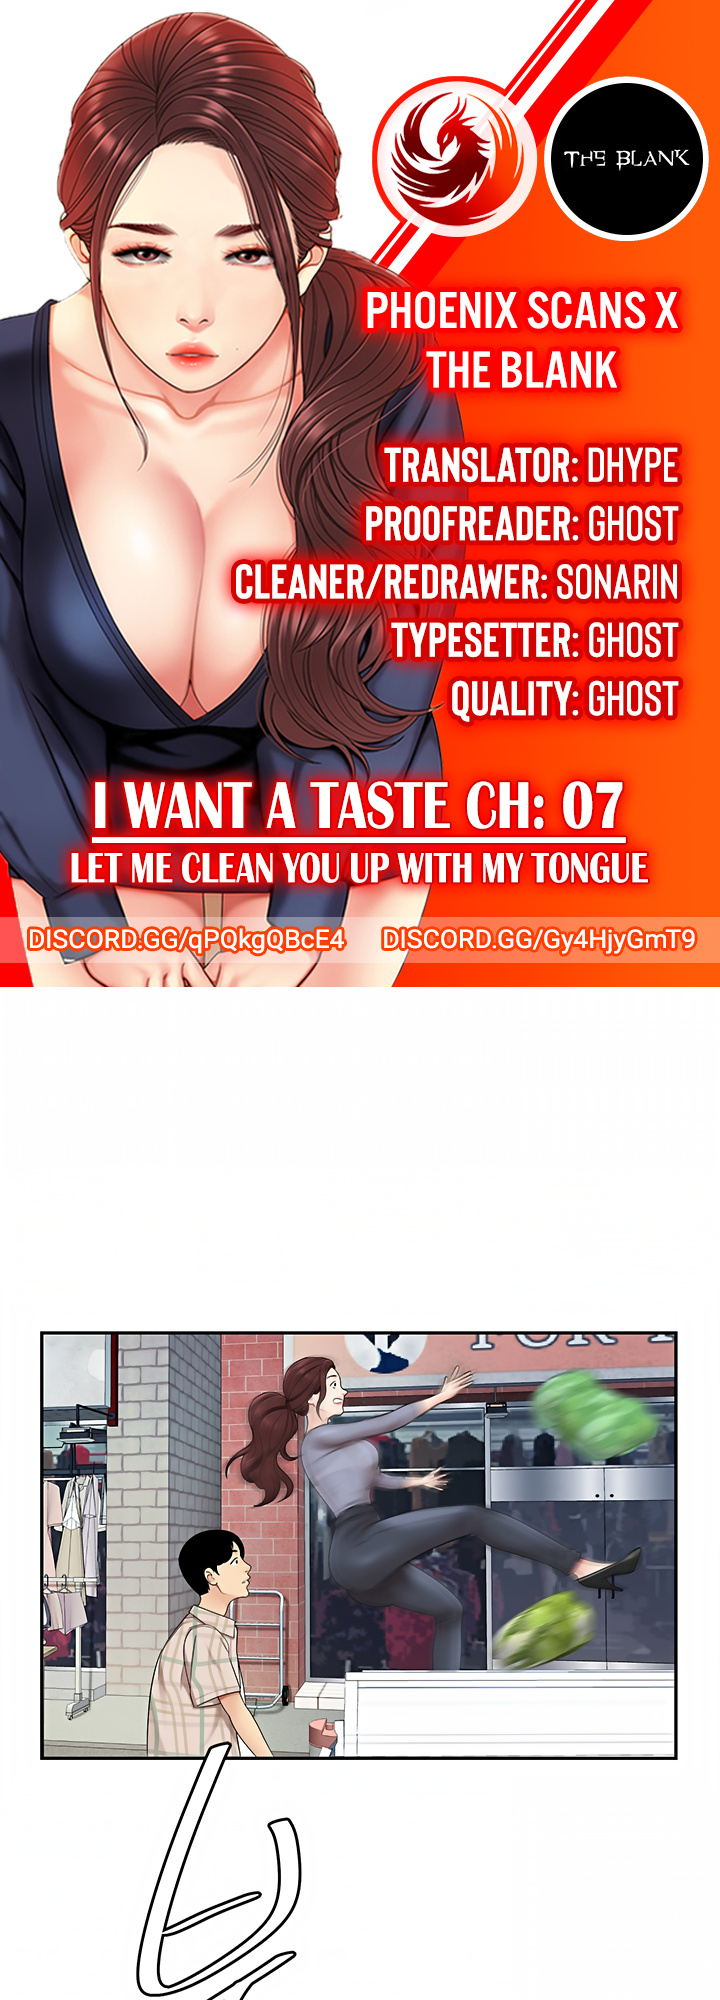 I Want A Taste - Page 1